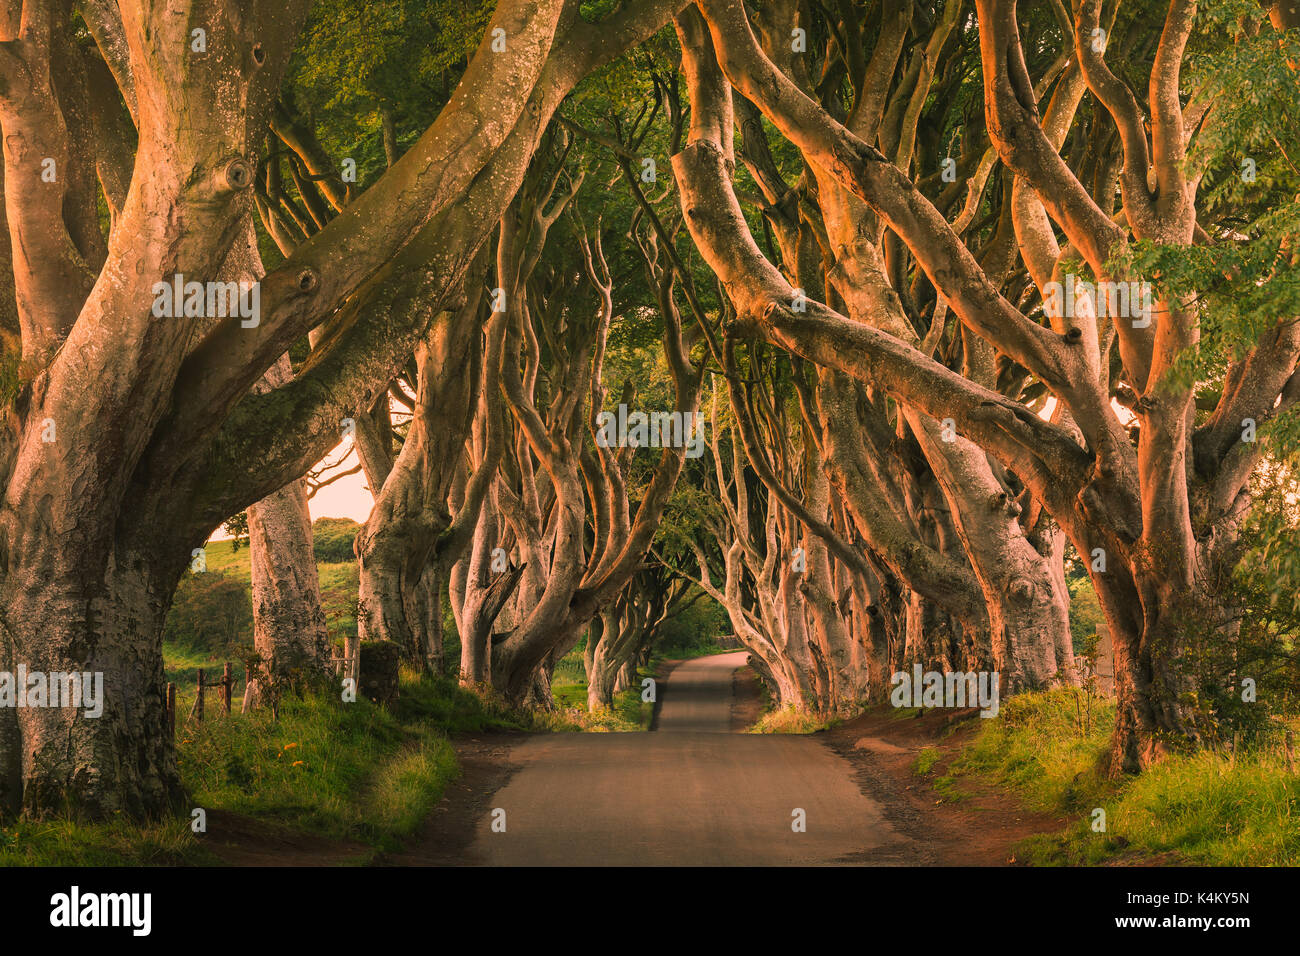 The Dark Hedges Is An Avenue Of Beech Trees Along Bregagh Road Between Armoy And Stranocum In County Antrim Northern Ireland Stock Photo Alamy